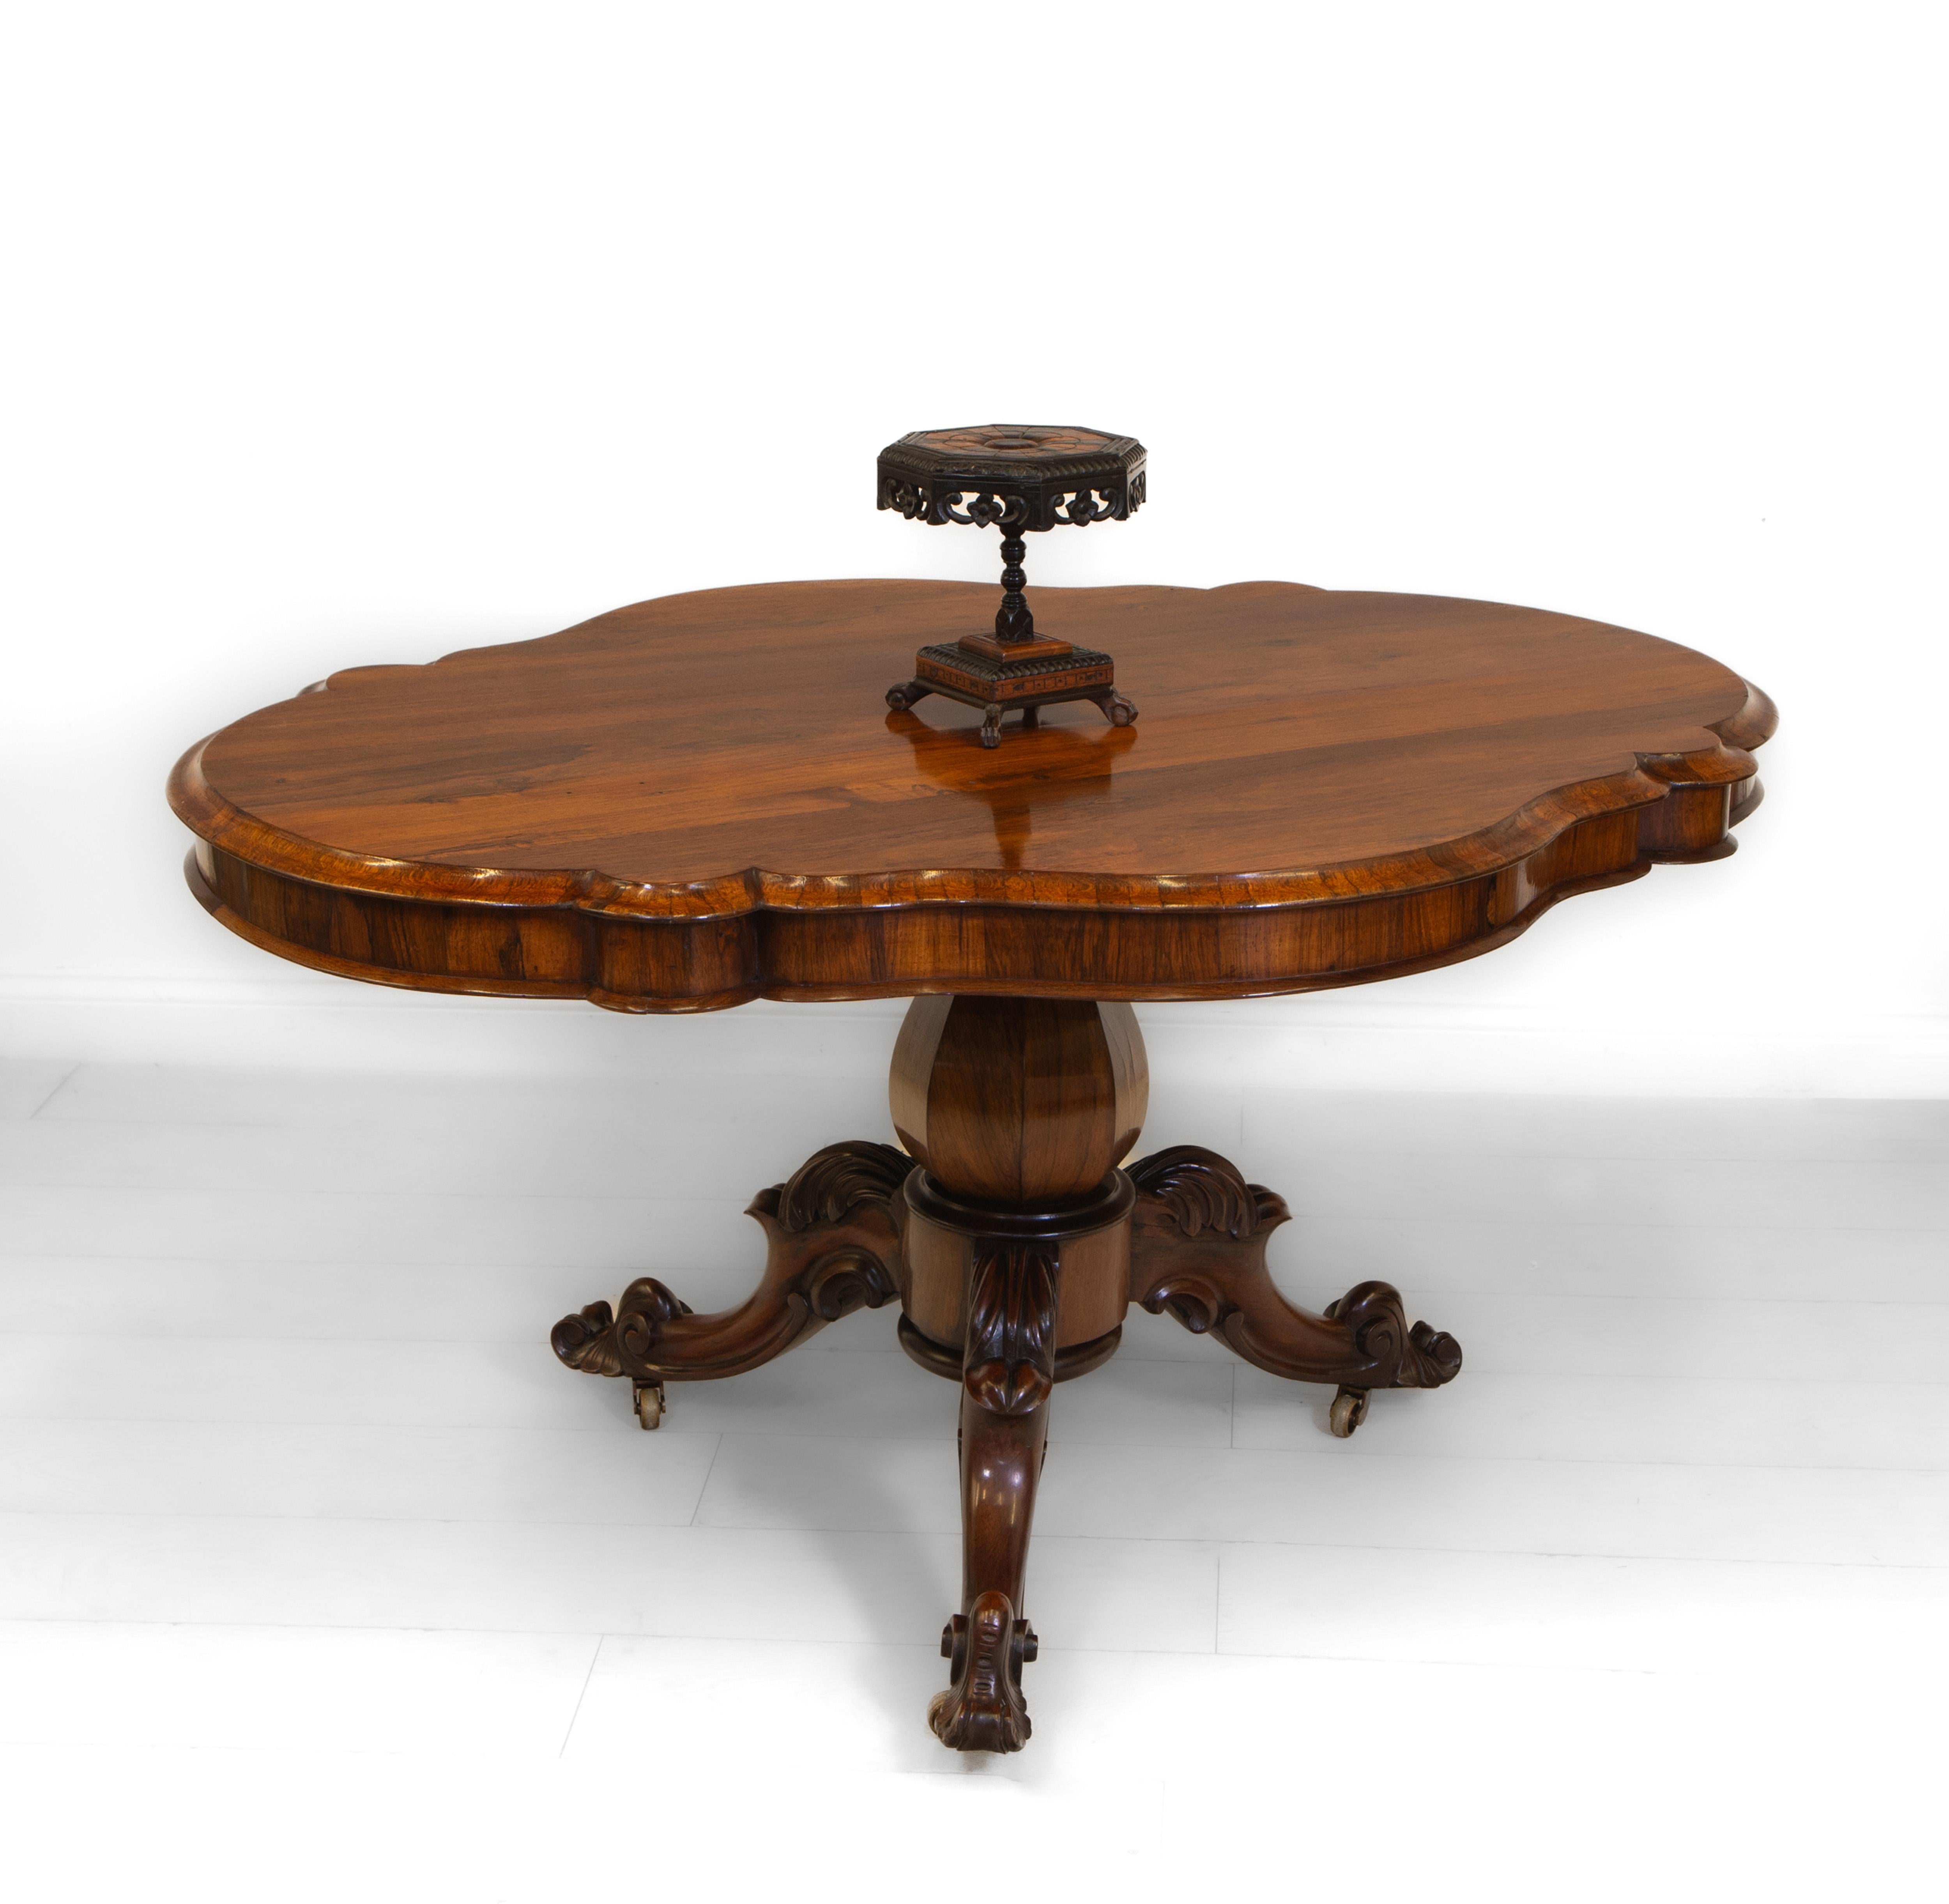 Rare Antique Ebony And Specimen Wood Ceylonese Miniature Octagonal Table In Good Condition For Sale In Norwich, GB